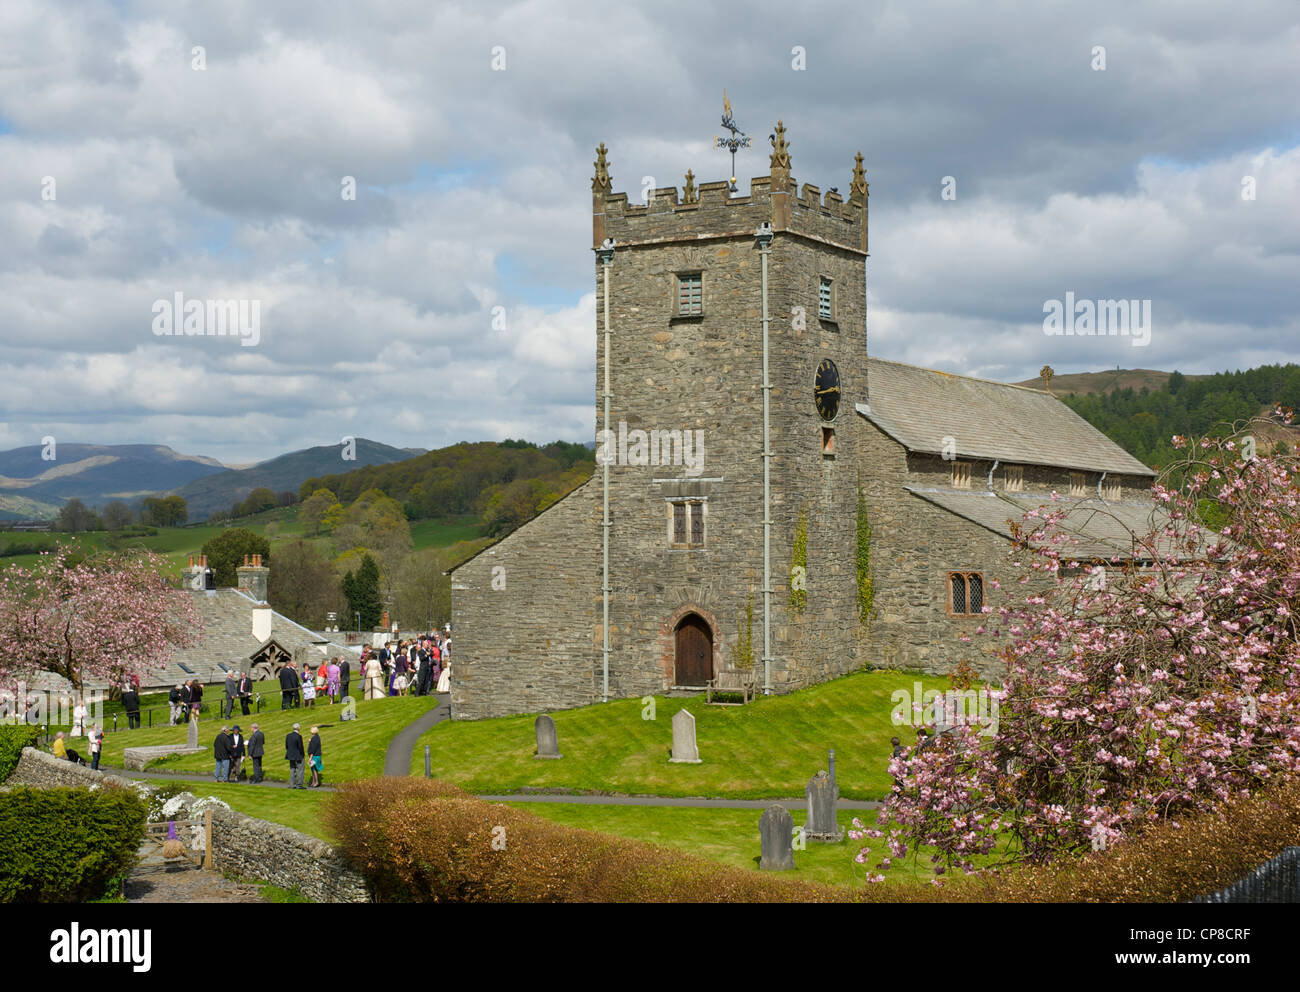 Wedding guests coming out of St Michael's Church, in the village of Hawkshead, Lake District National Park, Cumbria, England UK Stock Photo